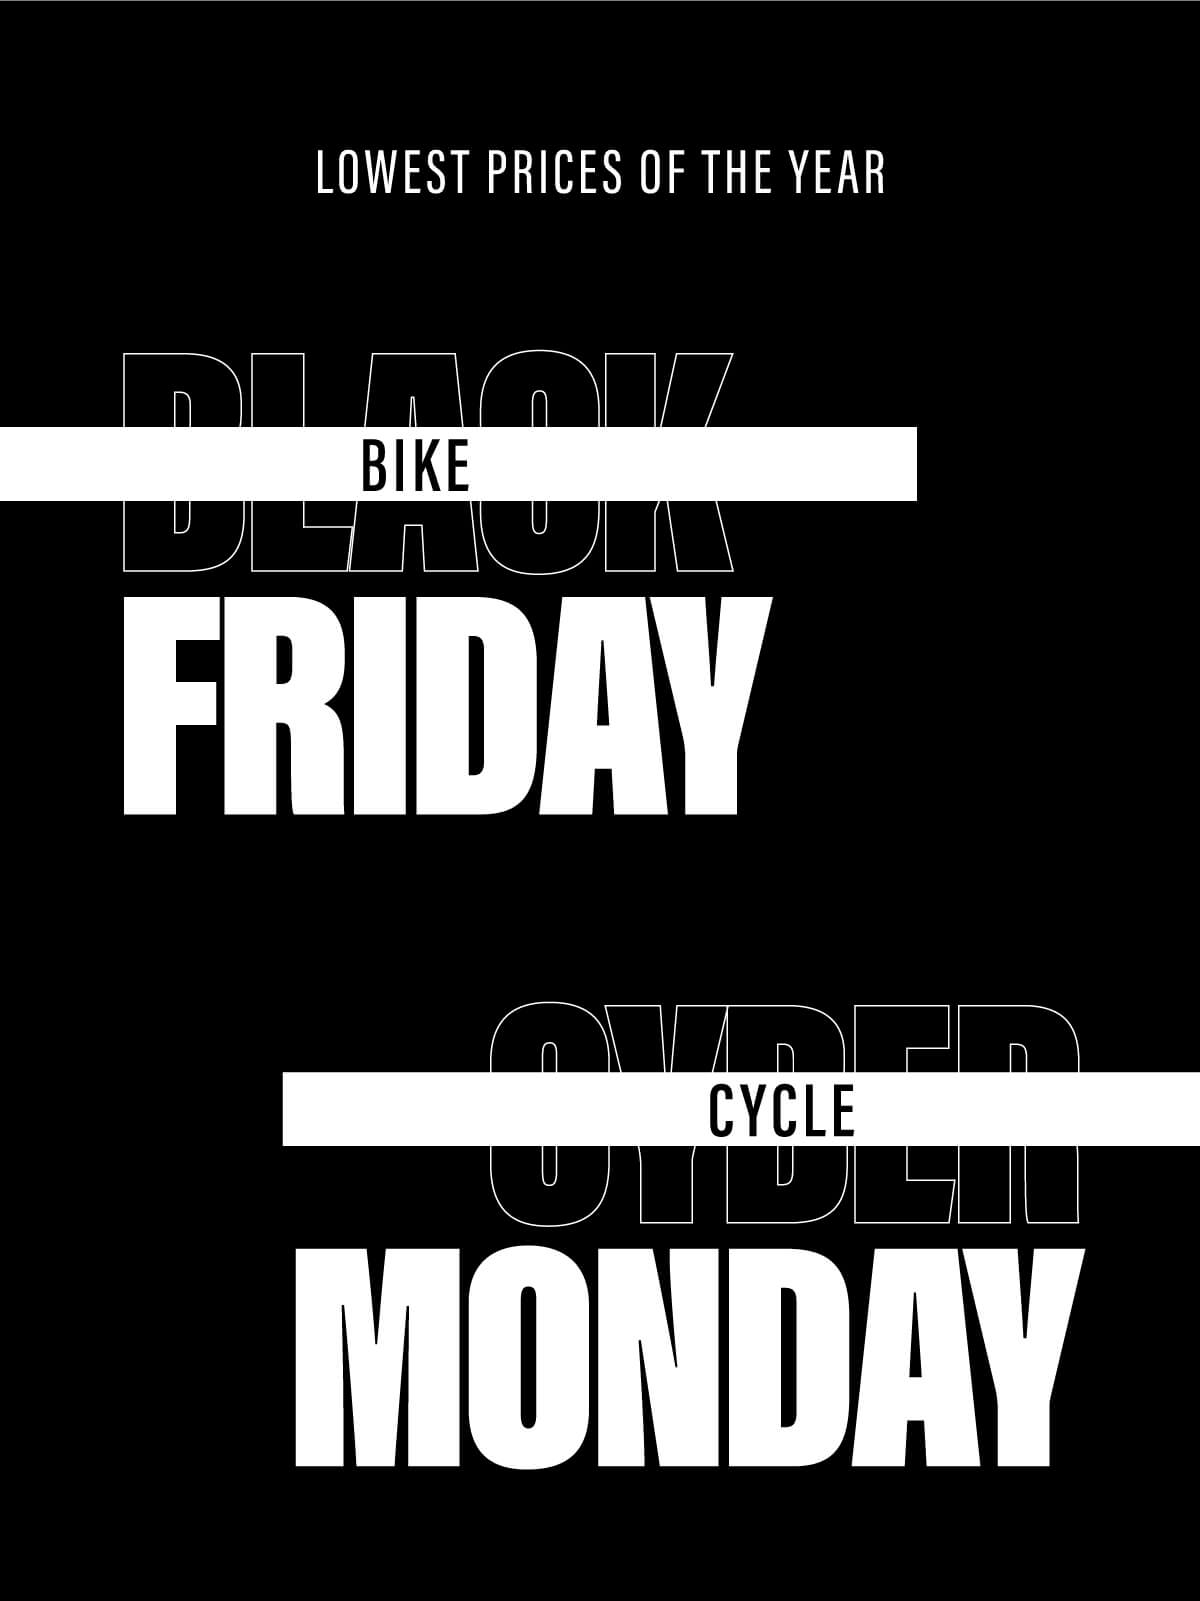 Bike Friday + Cycle Monday: Lowest Prices of the Year Start Now!